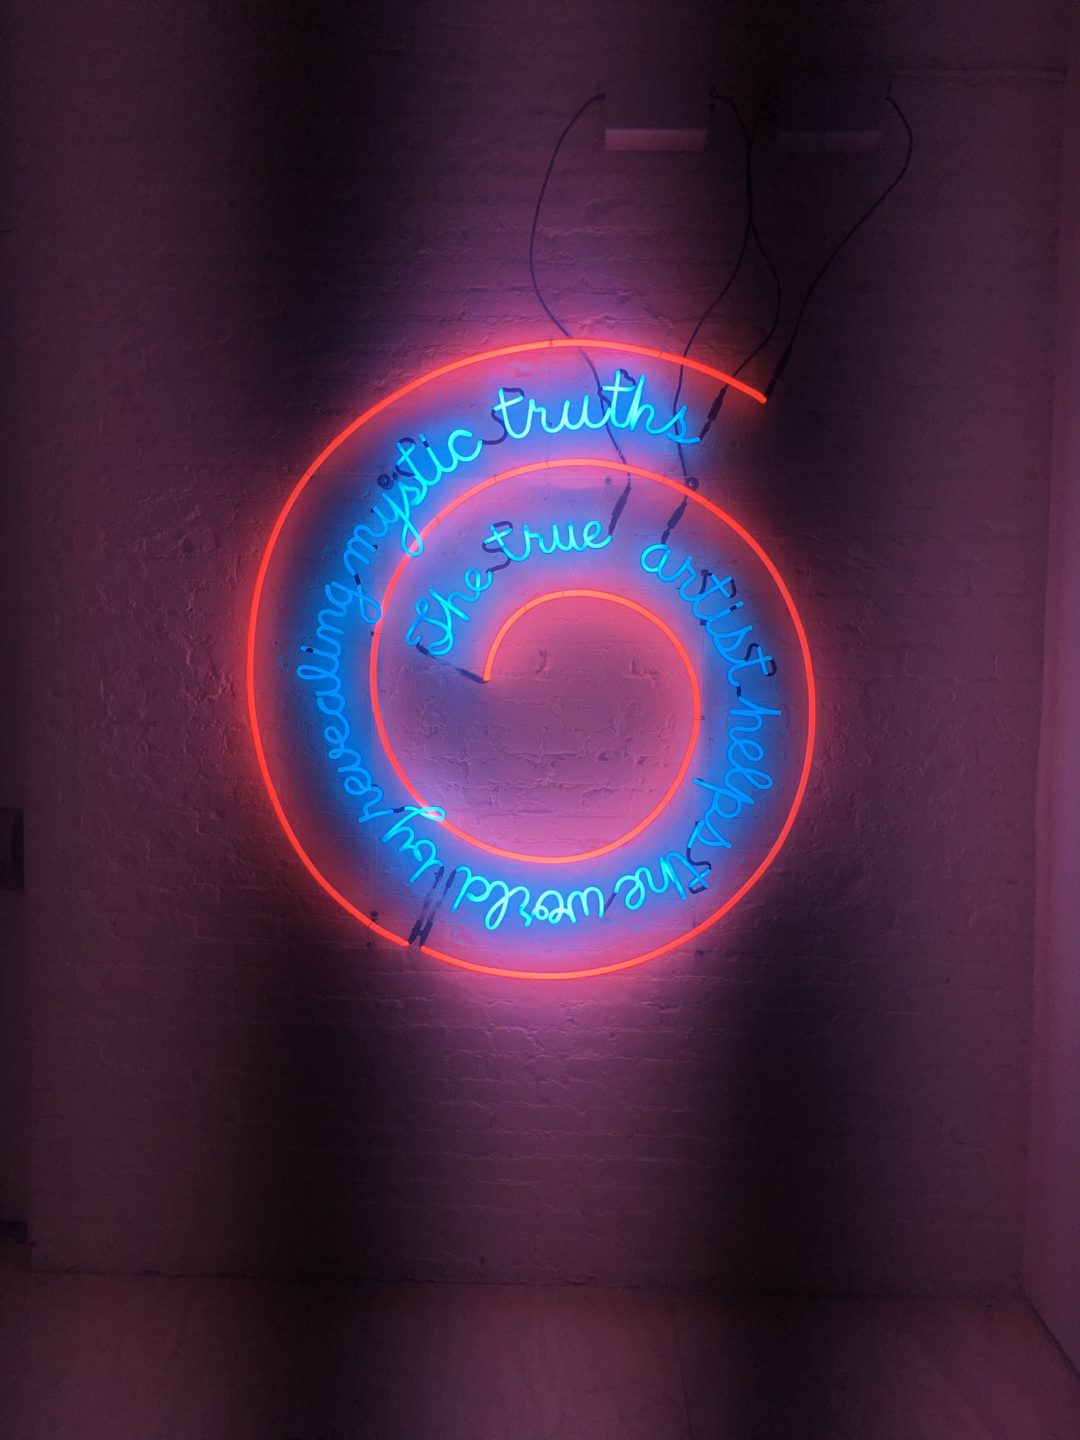 The True Artist Helps the World by Revealing Mystic Truths (Window or Wall Sign) by Bruce Nauman, 1967, Neon tubing with clear-glass tubing, suspension frame